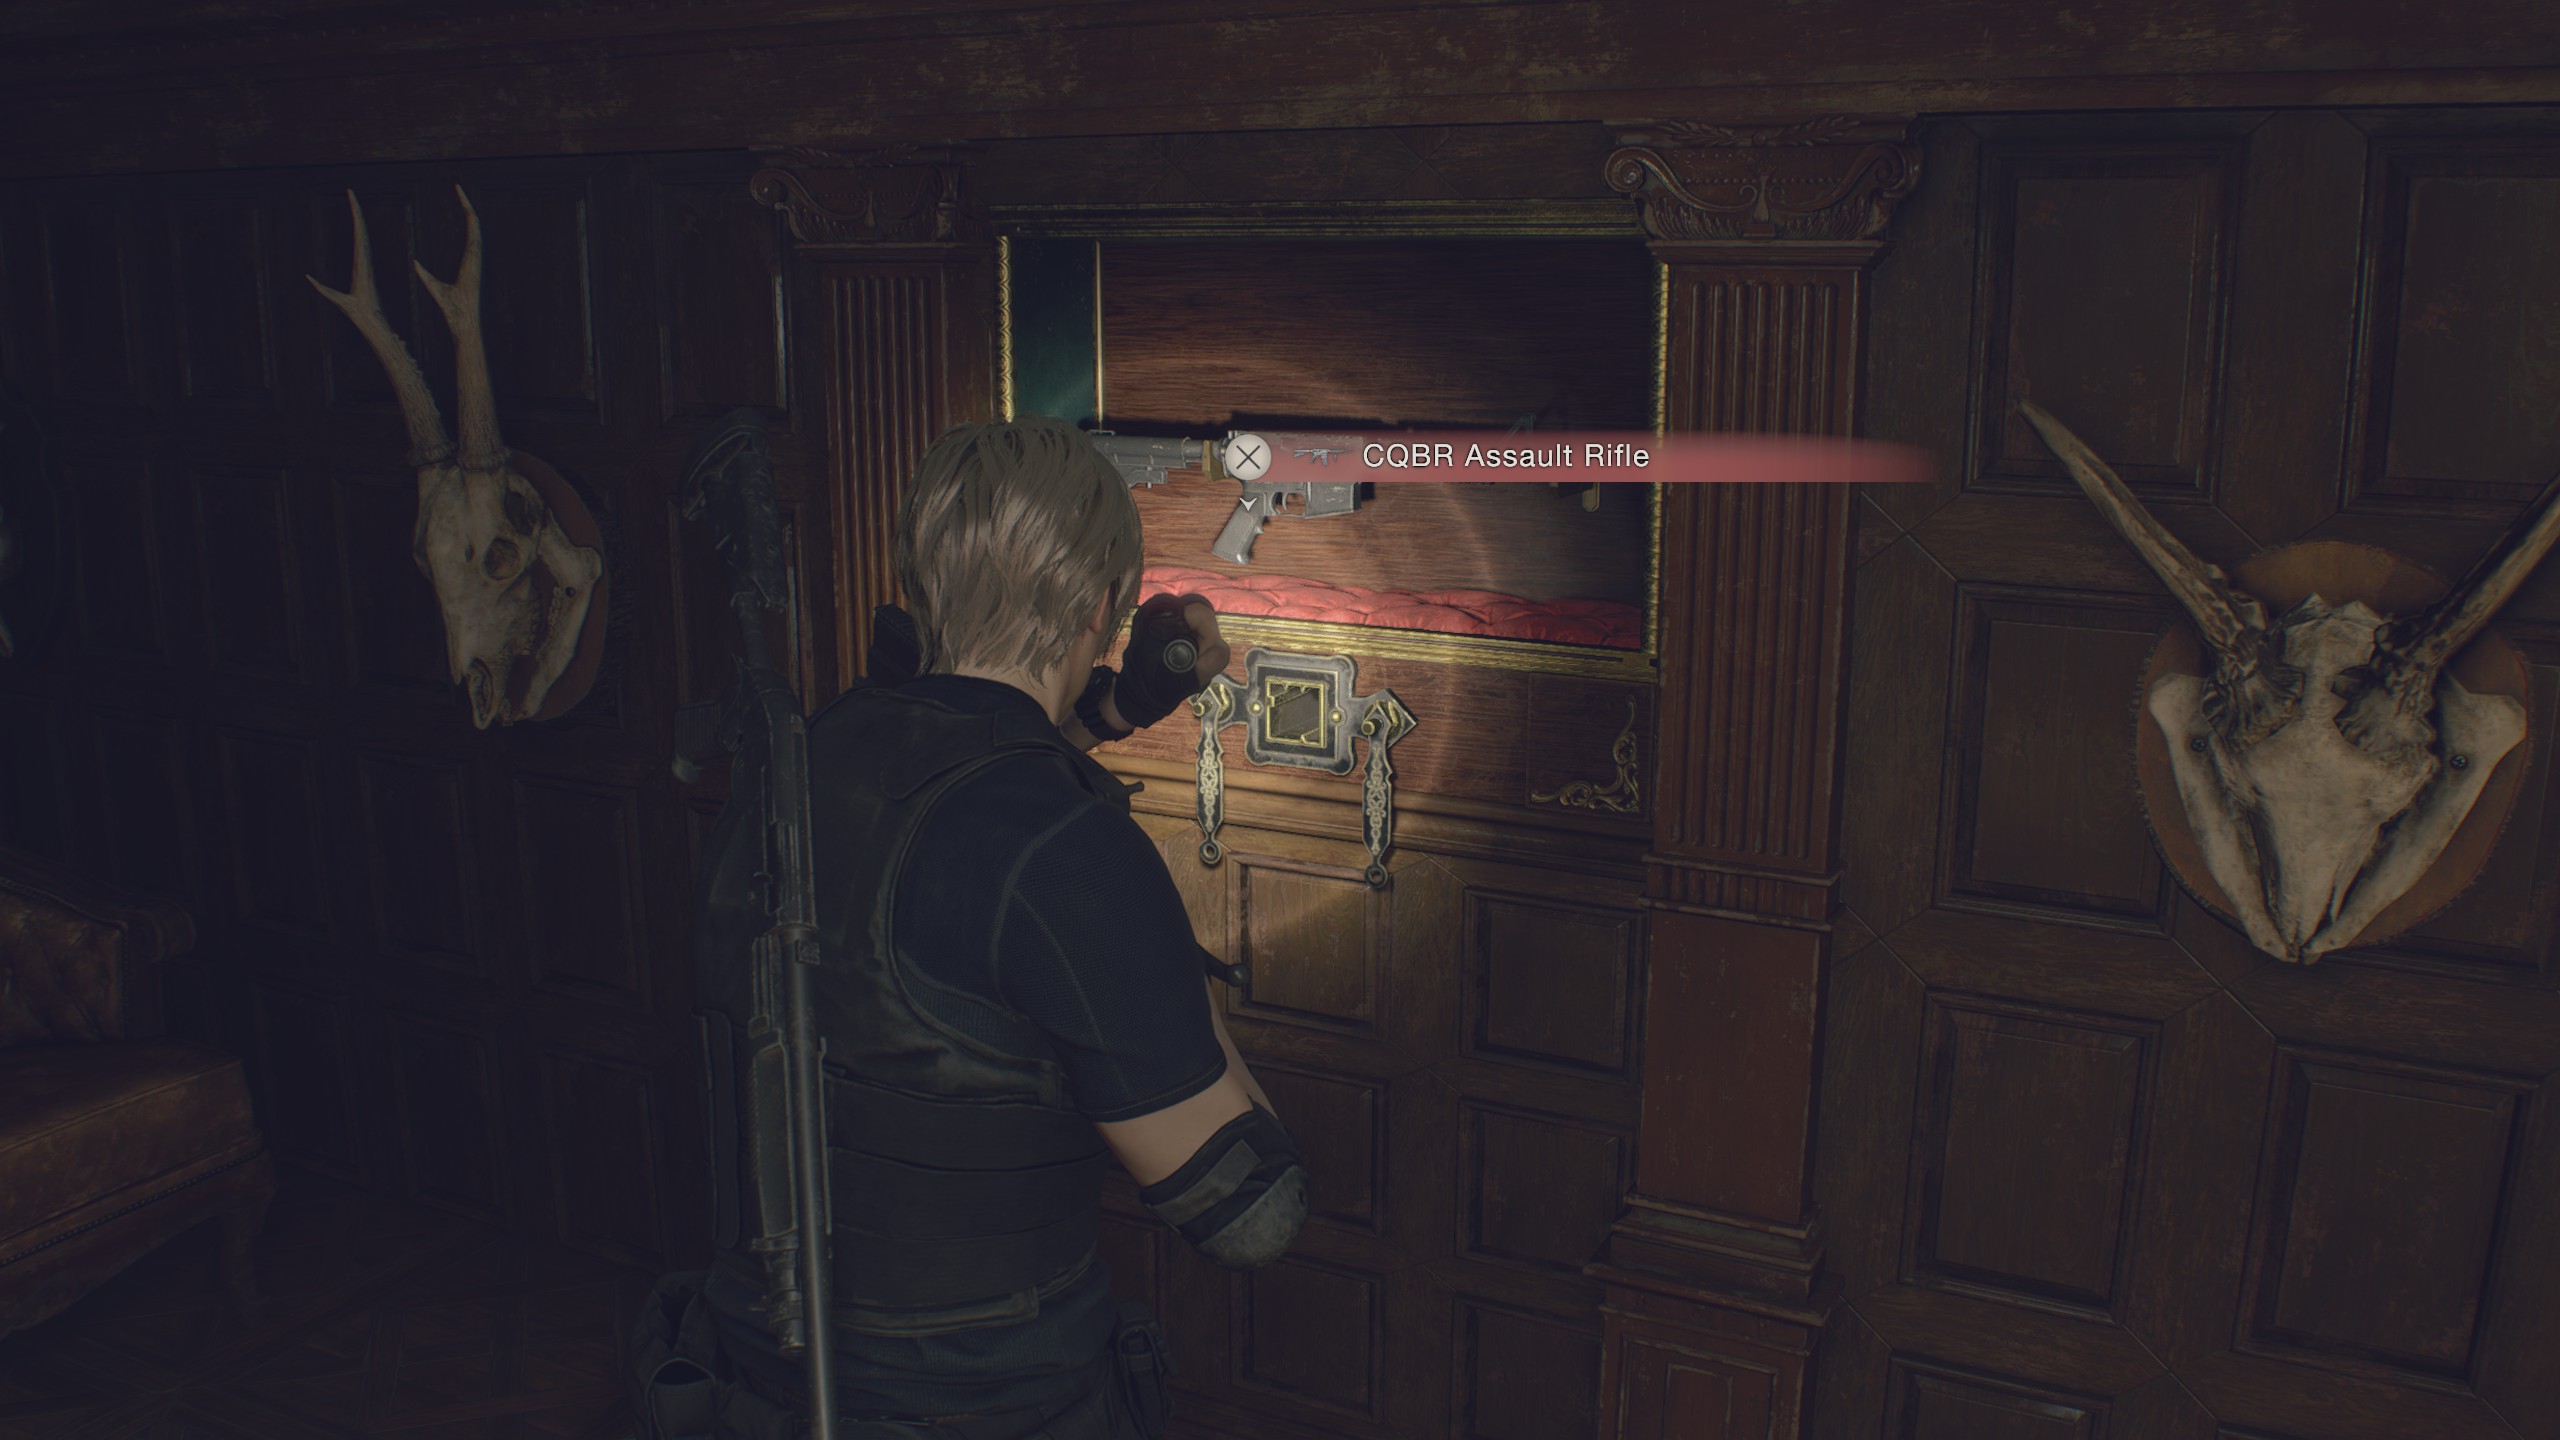 Resident Evil 4 Remake secret weapons - CQBR Assault Rifle in a lock box